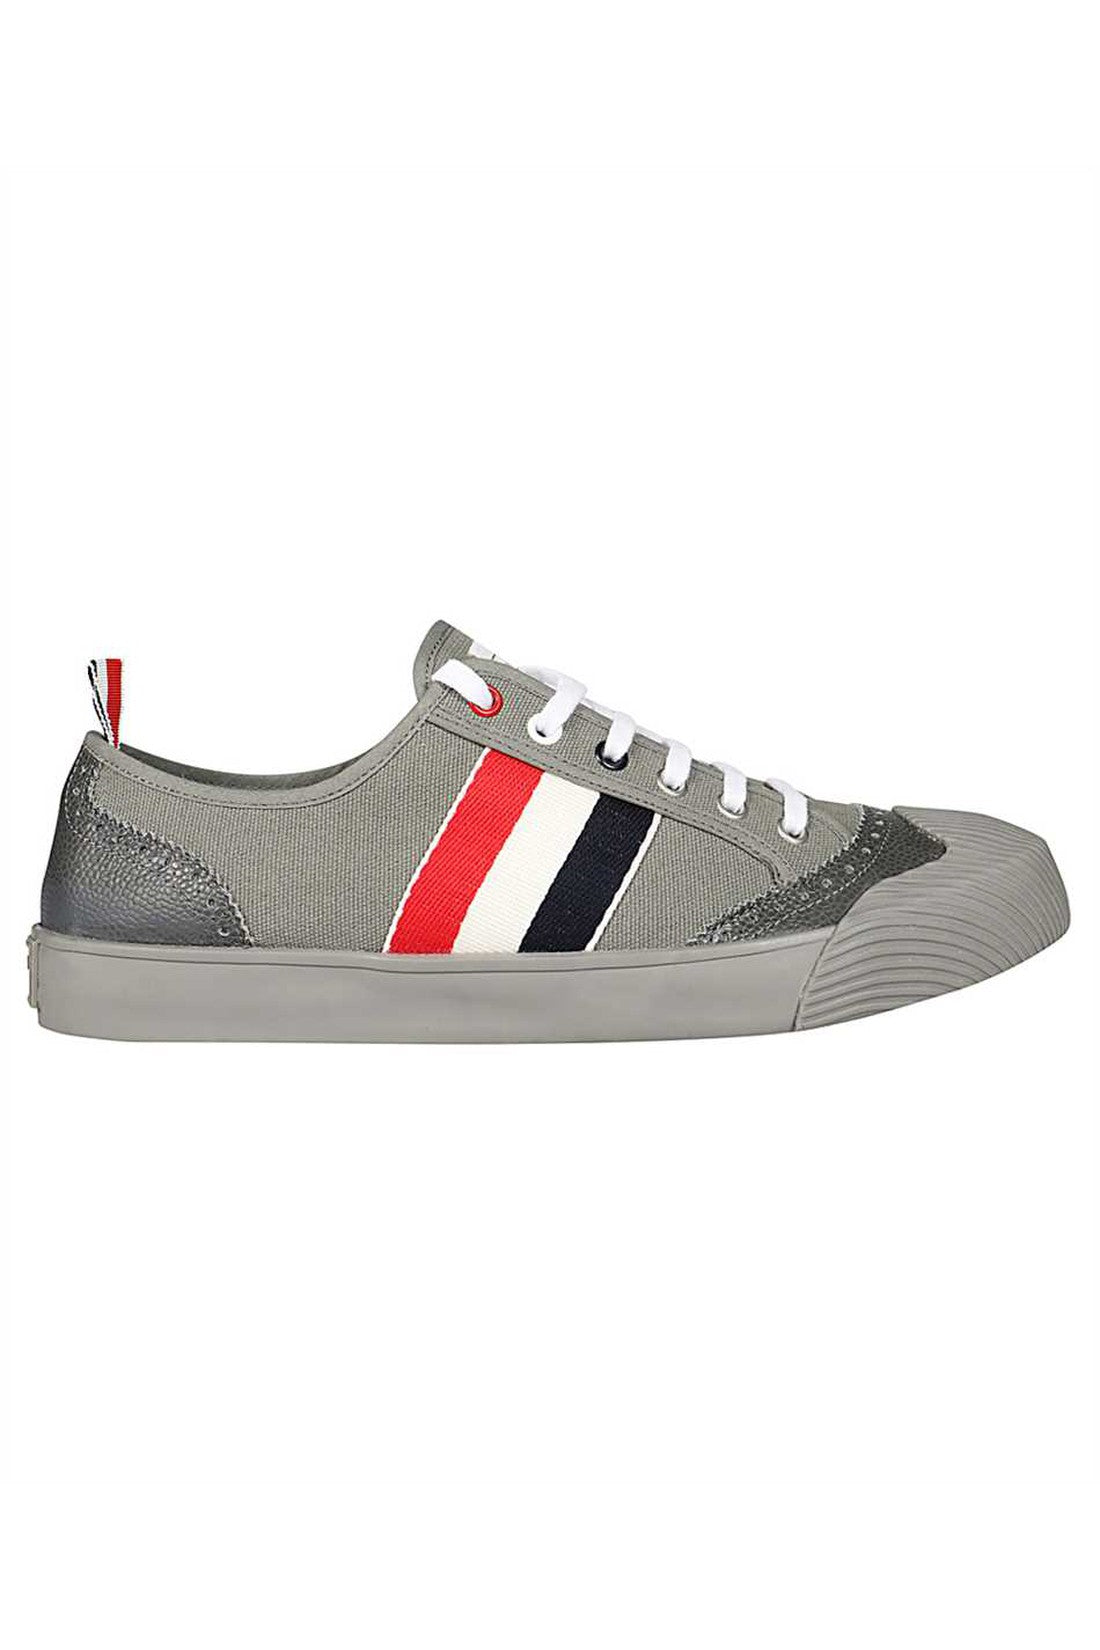 Canvas low-top sneakers-Thom Browne-OUTLET-SALE-7.5-ARCHIVIST